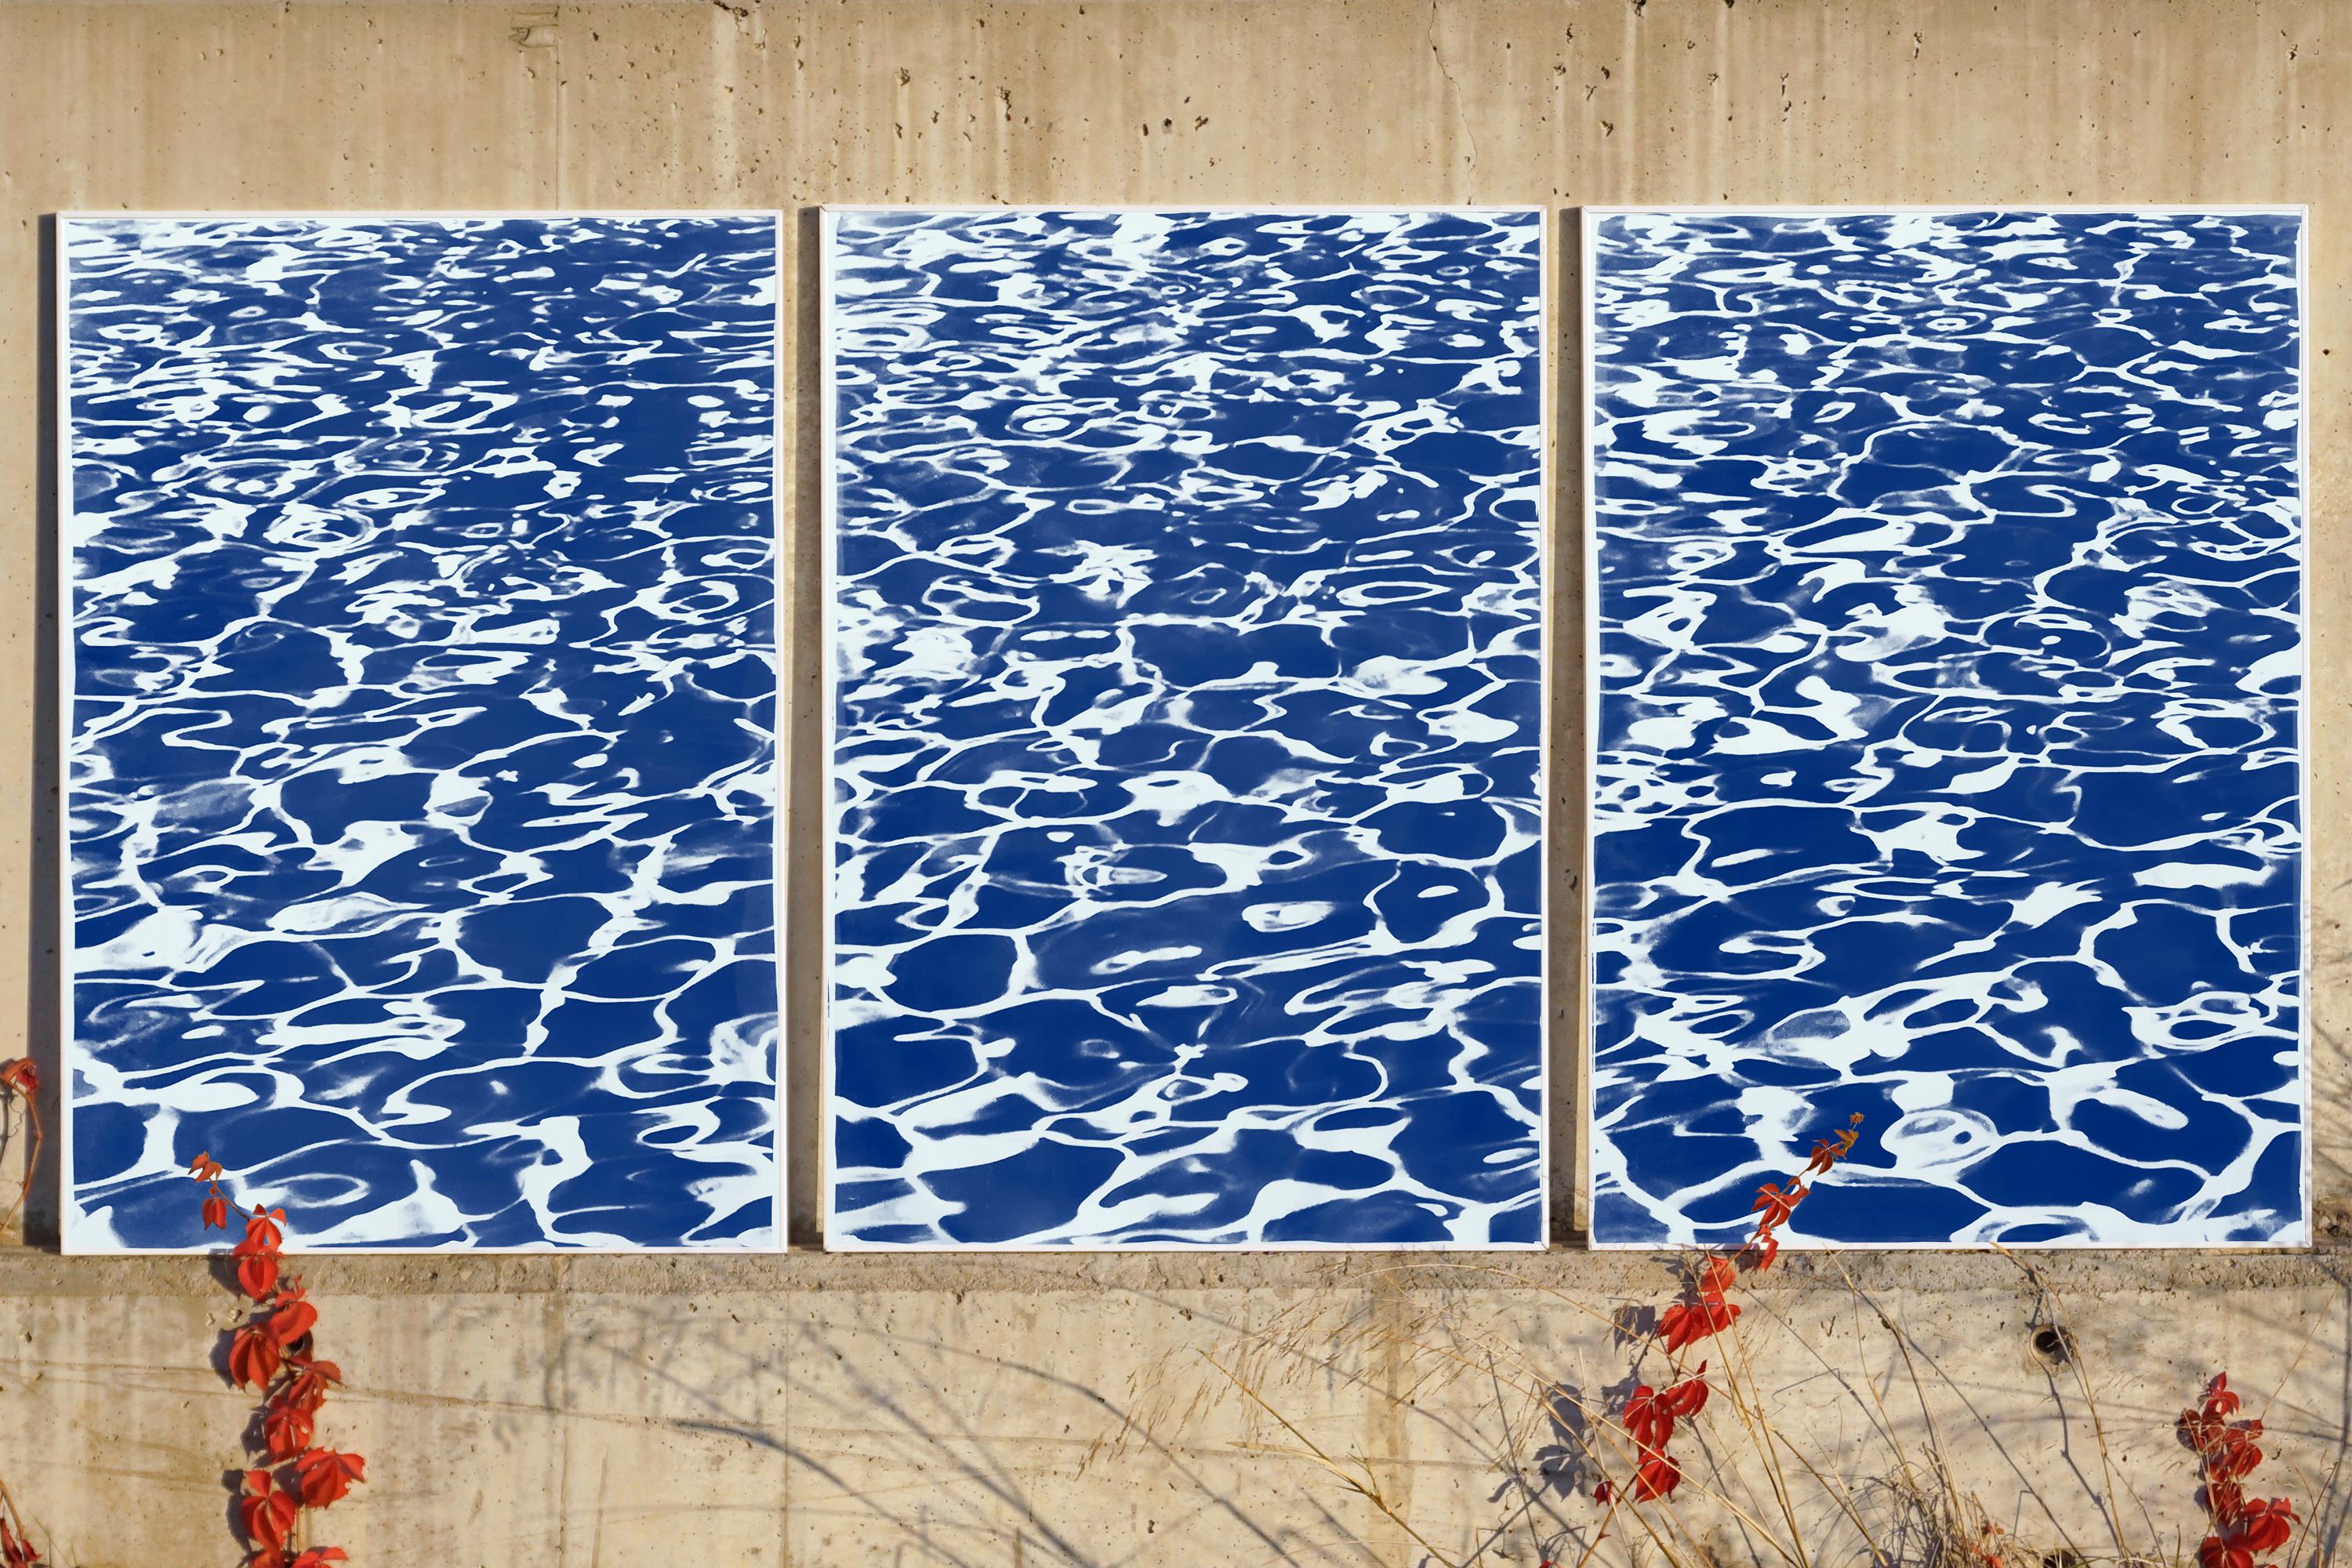 Pool Patterns, Nautical Abstract Seascape Triptych, Blue Cyanotype Print 4